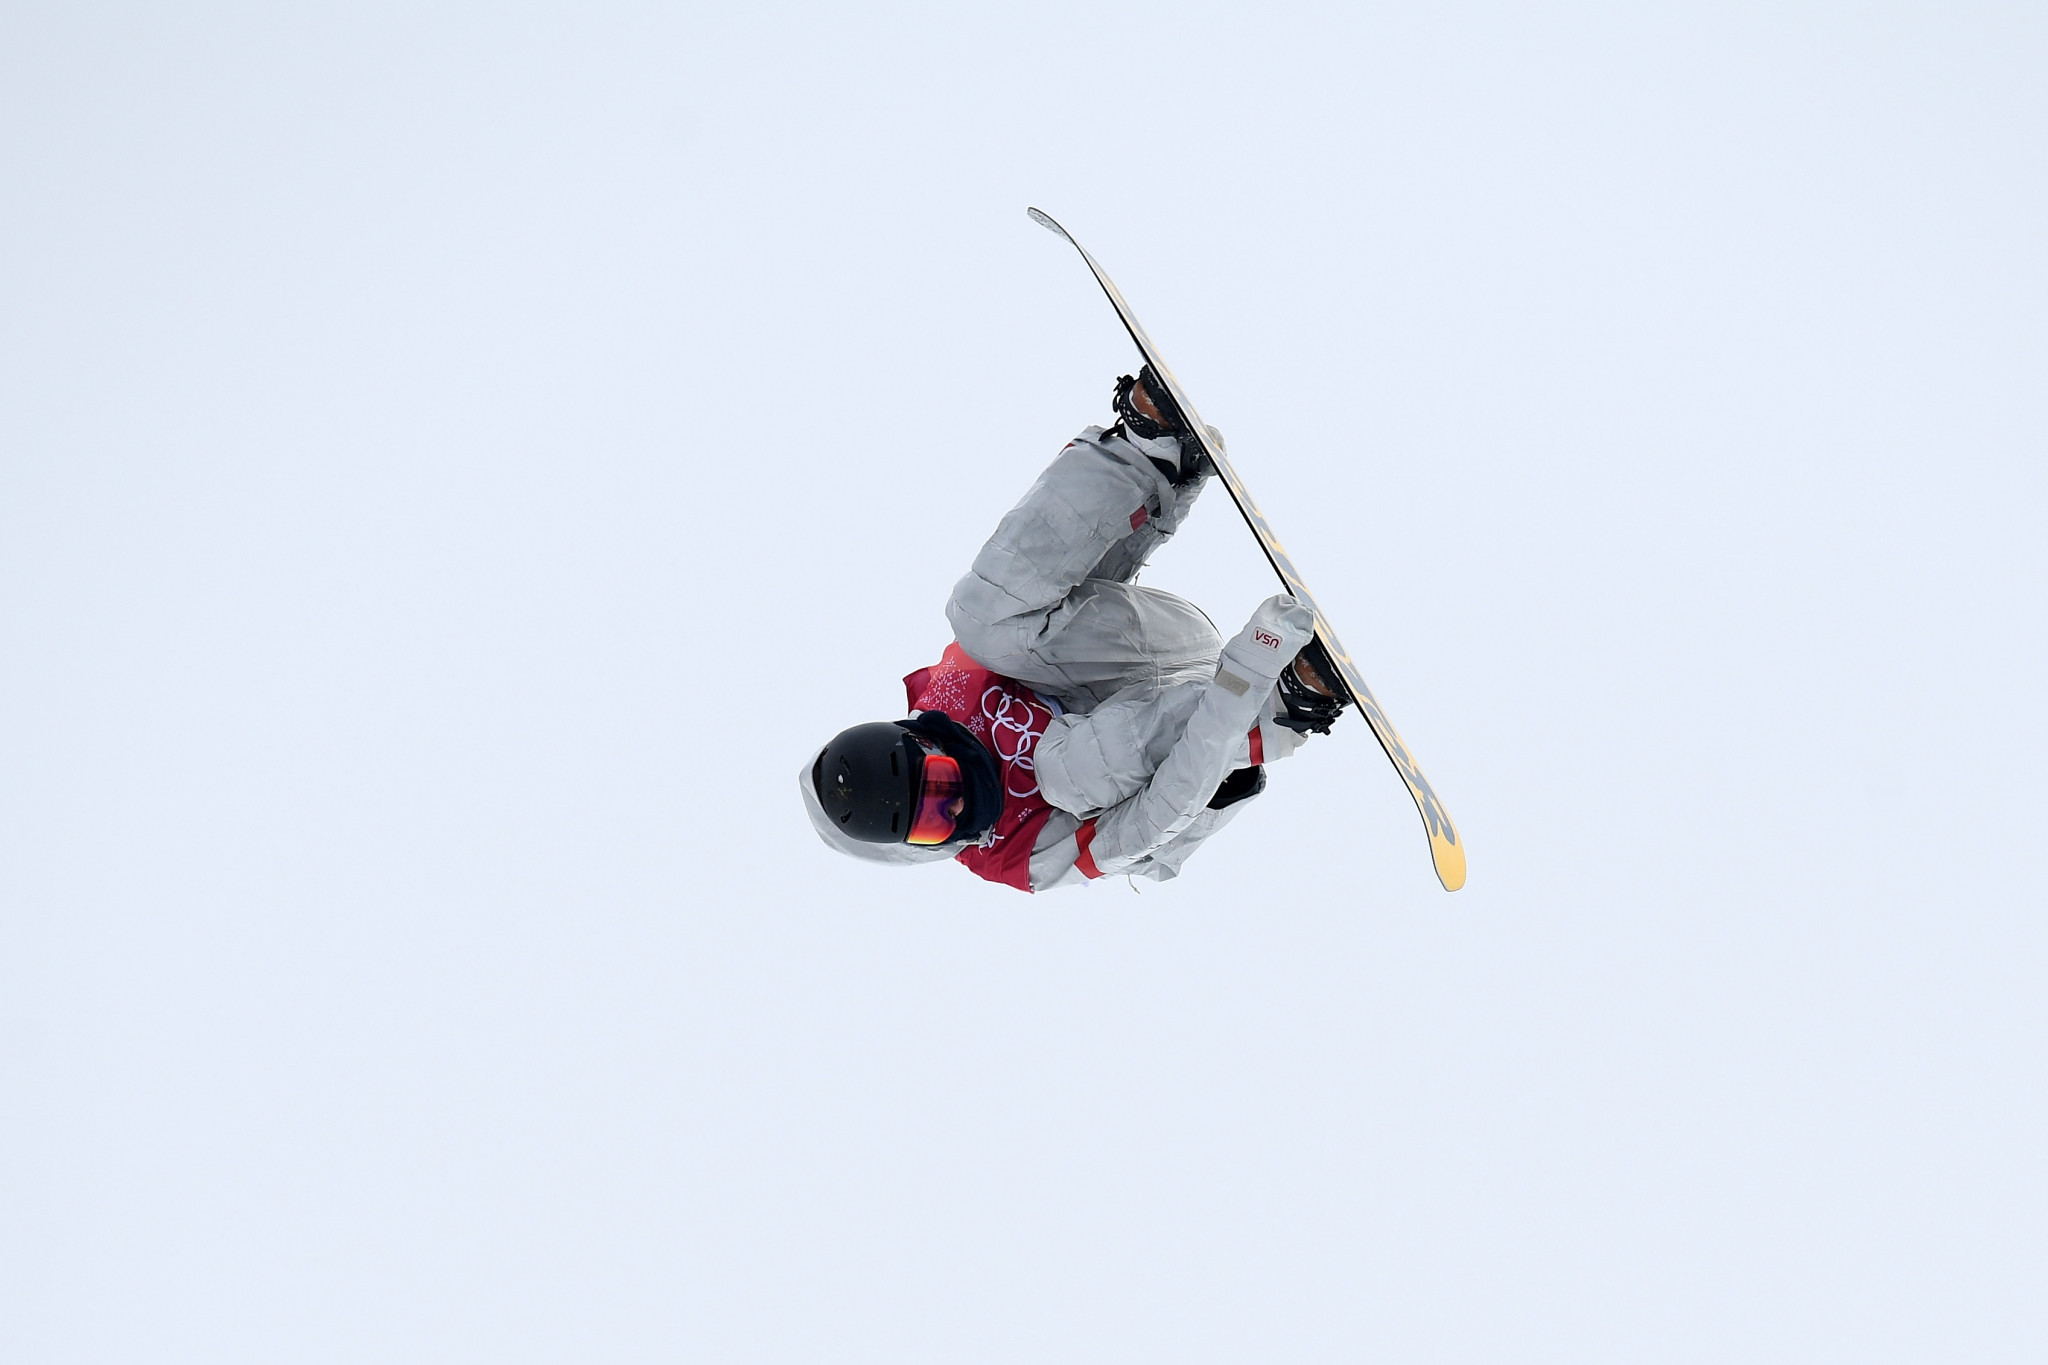 The United States' Kyle Mack produced strong first and second runs to take the silver medal ©Getty Images